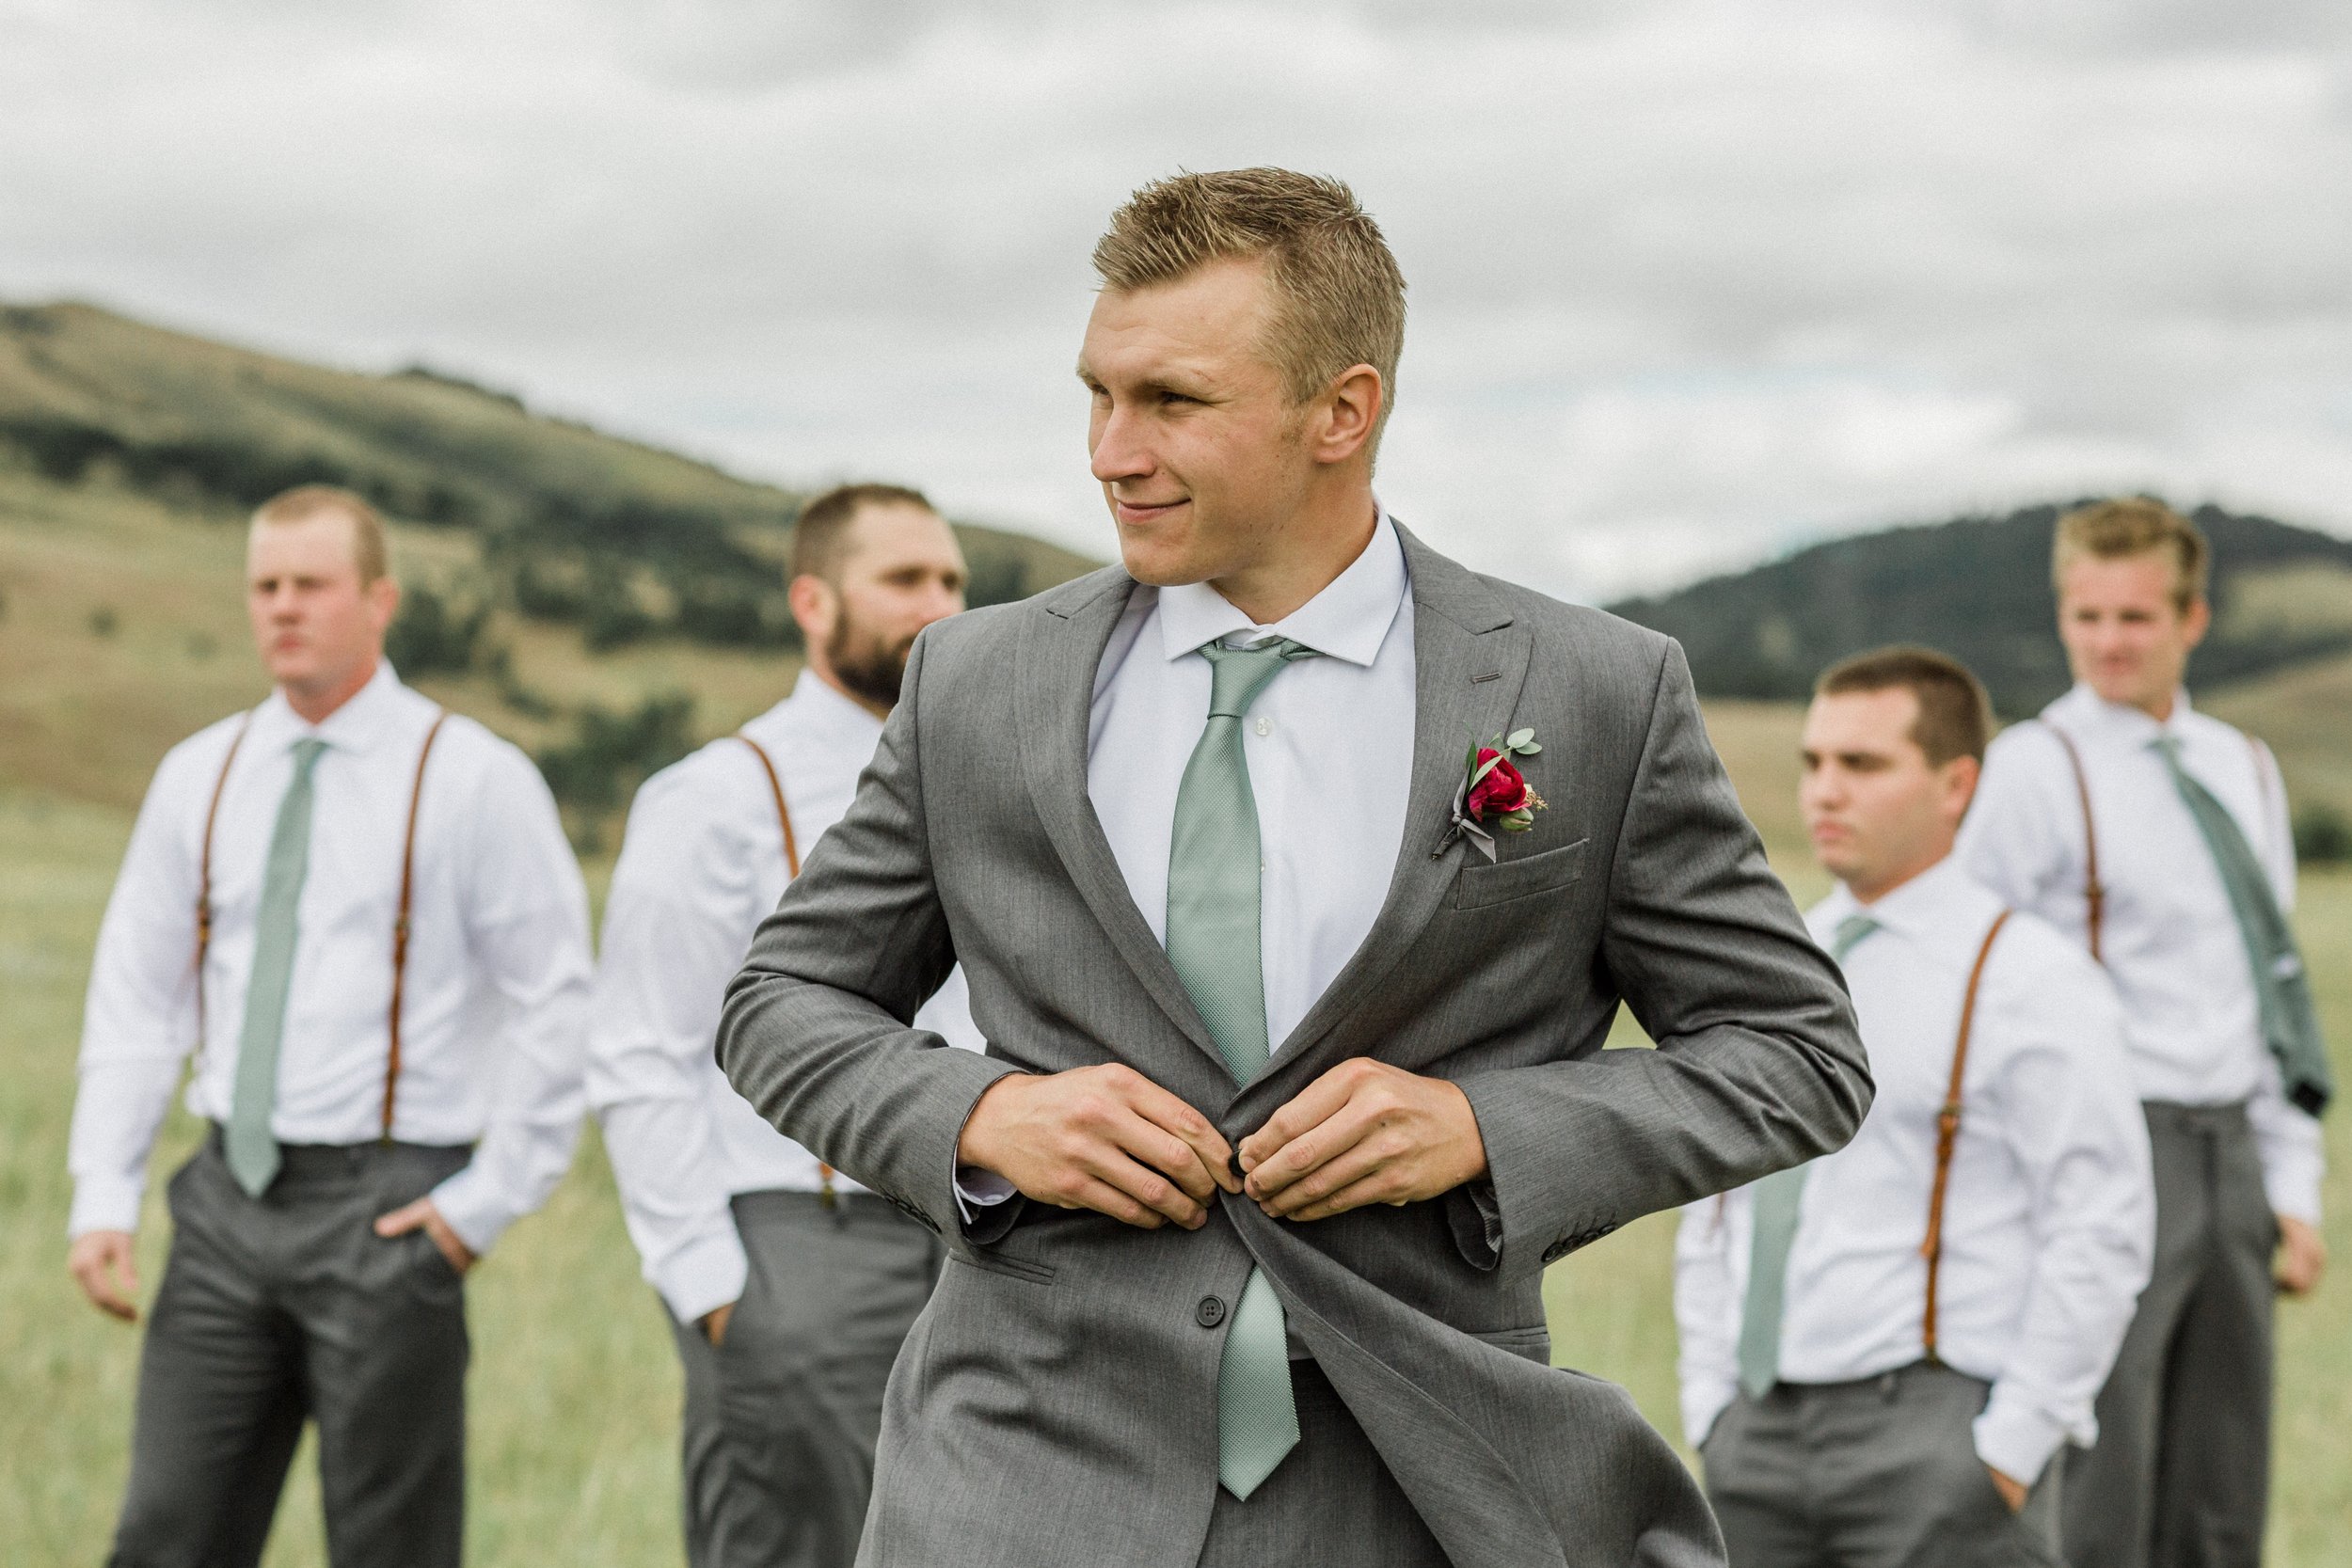 groomsmen photo with grey suits and green ties (Copy)